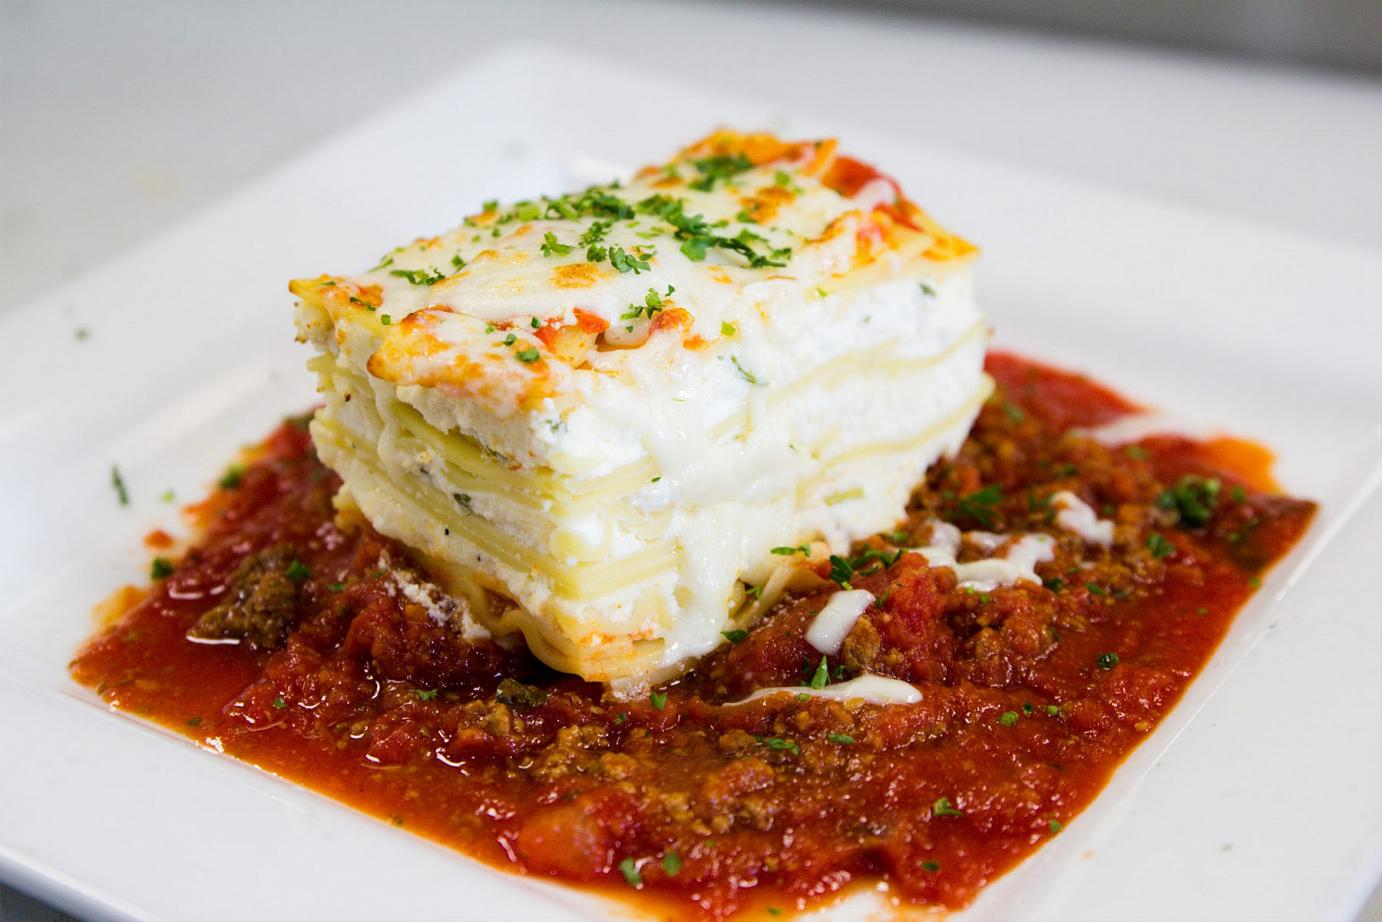 White lasagna with red tomato sauce on the side